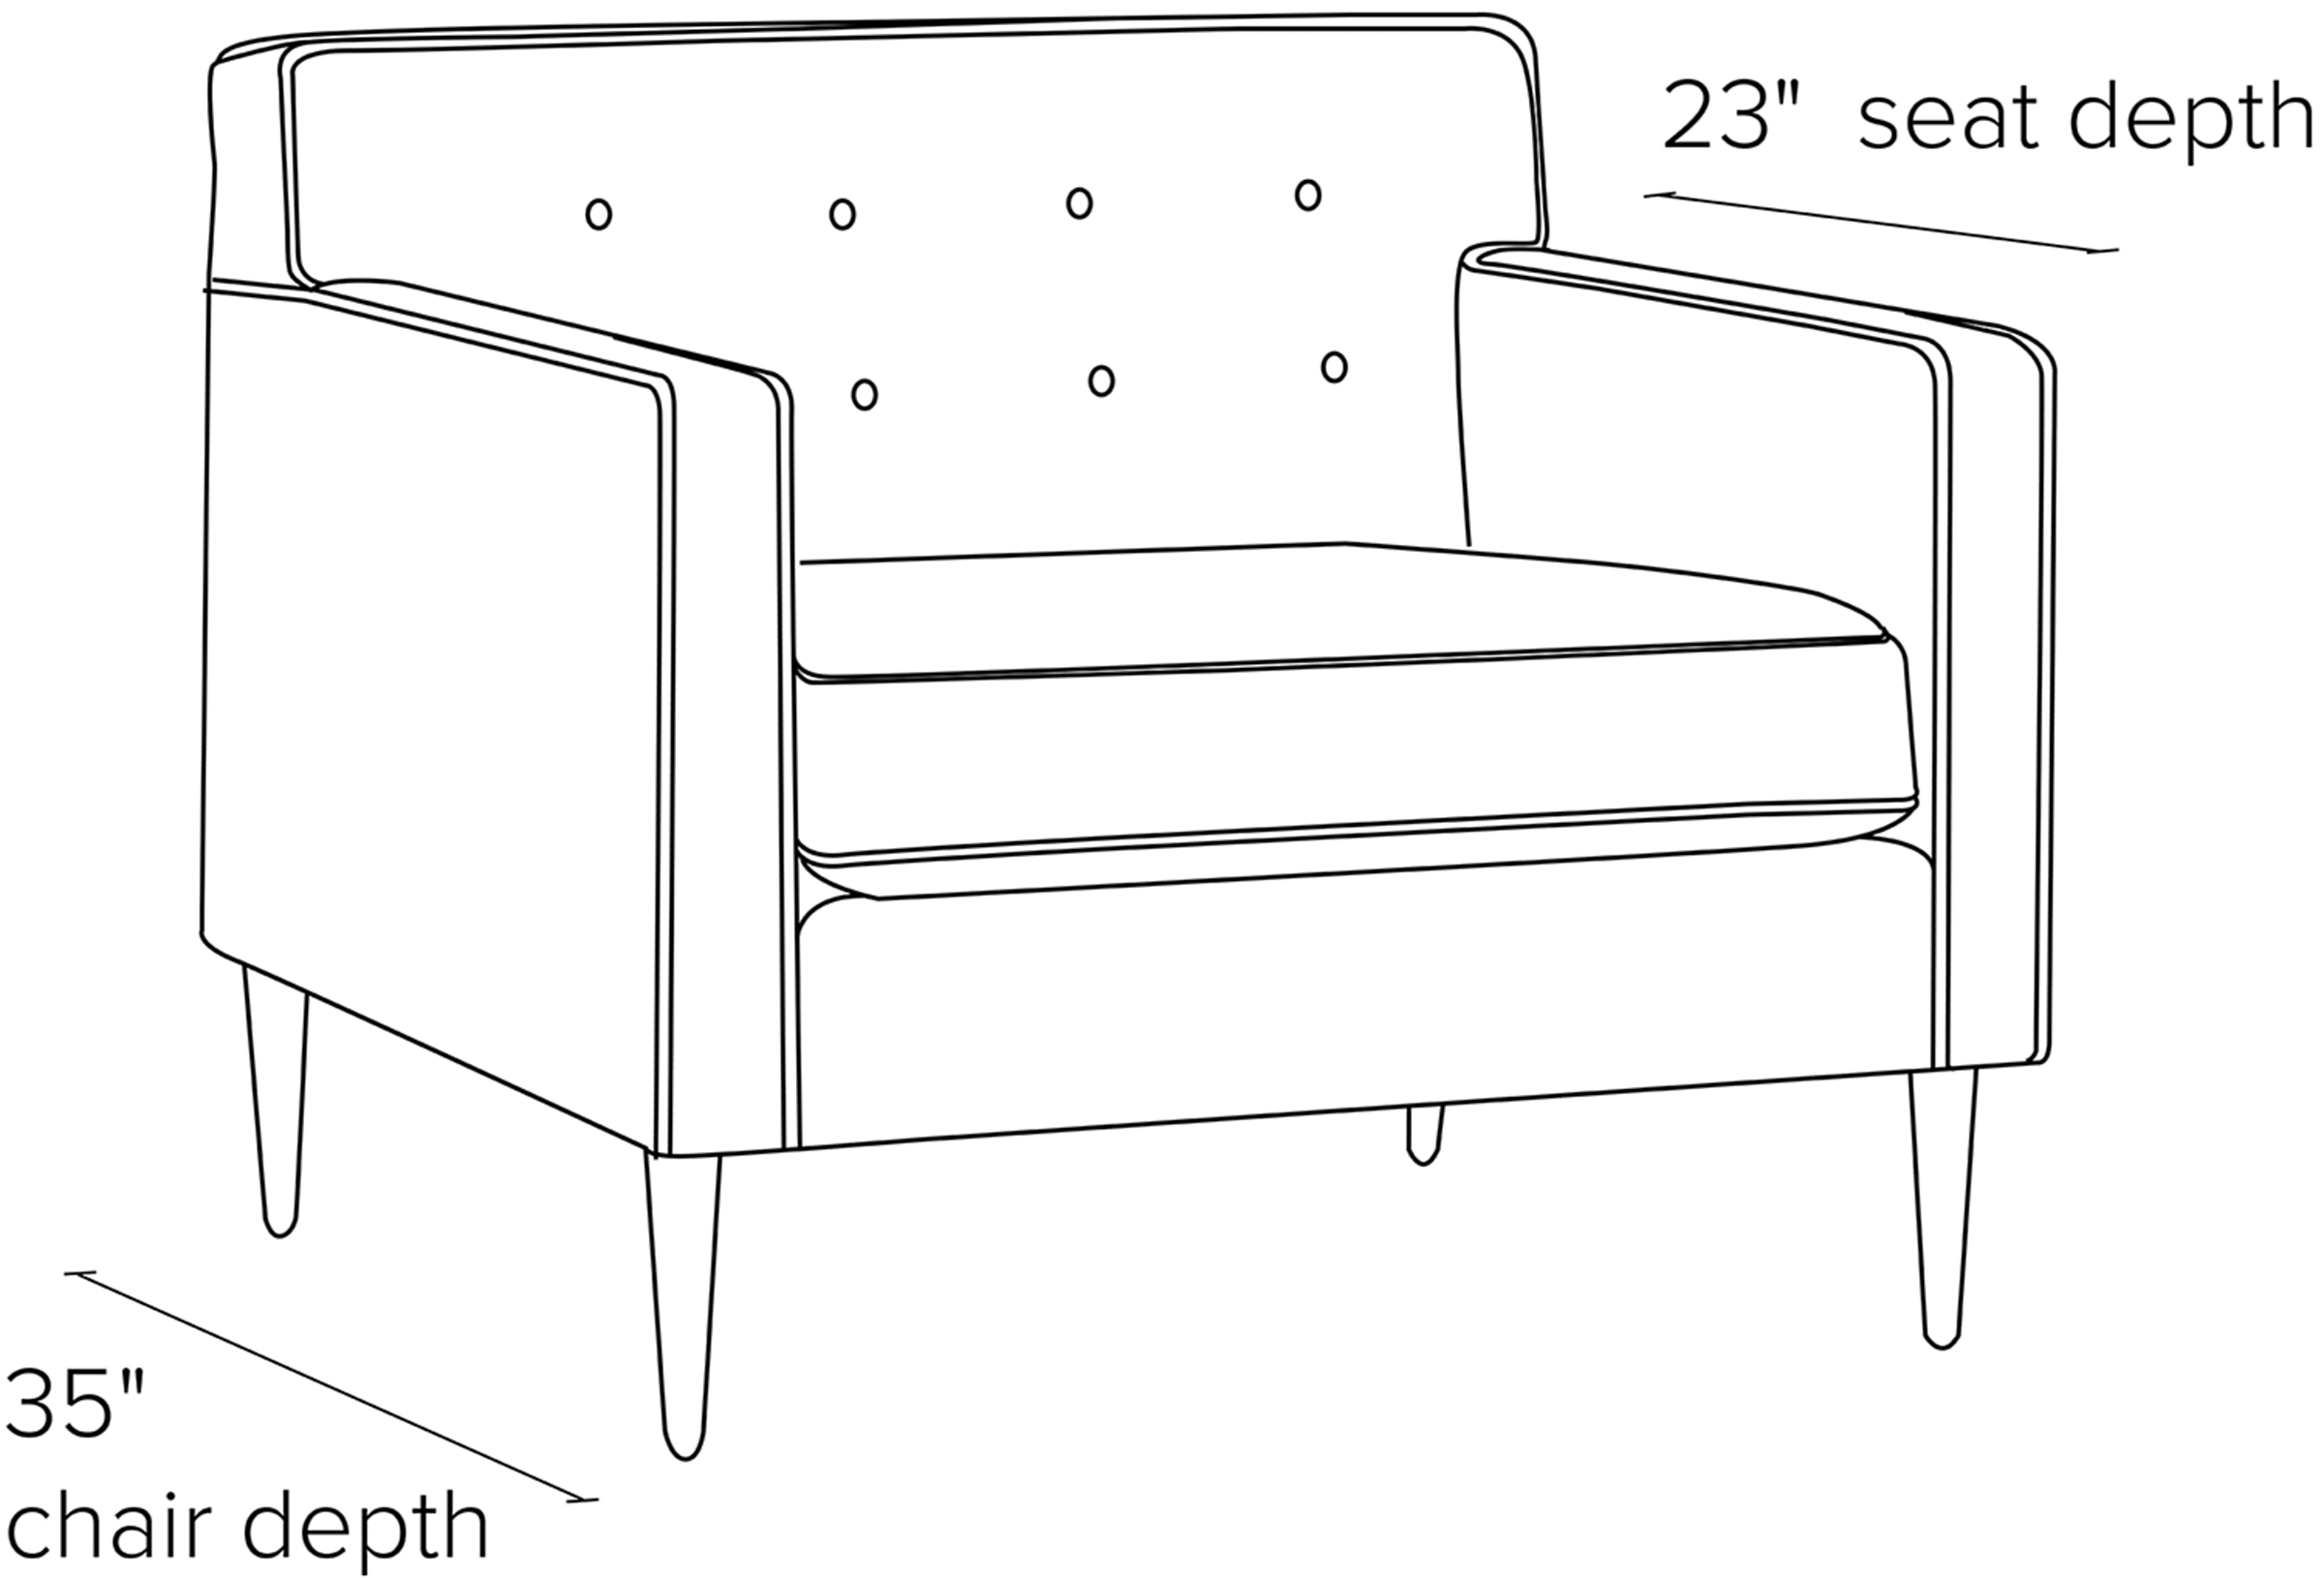 Side view dimension illustration of Holmes chair.